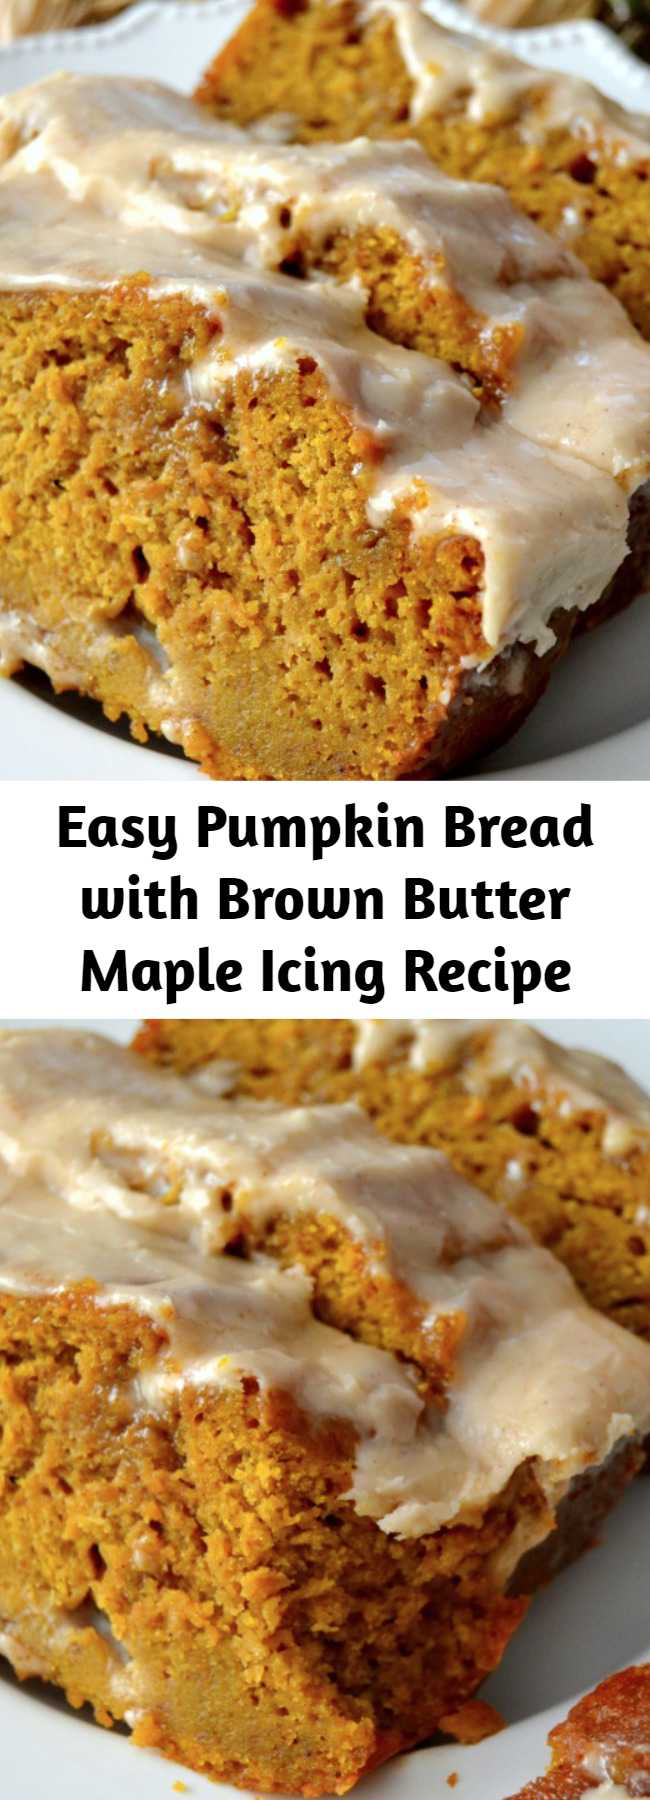 Easy Pumpkin Bread with Brown Butter Maple Icing Recipe - The Best Pumpkin Bread with Brown Butter Maple Icing Recipe. Perfectly spiced, moist and tender, this Pumpkin Bread will soon become a family favorite! Leave it naked if you wish, or stud it with nuts - however, I prefer mine with this simple brown butter maple glaze. I'm sure you will, too!